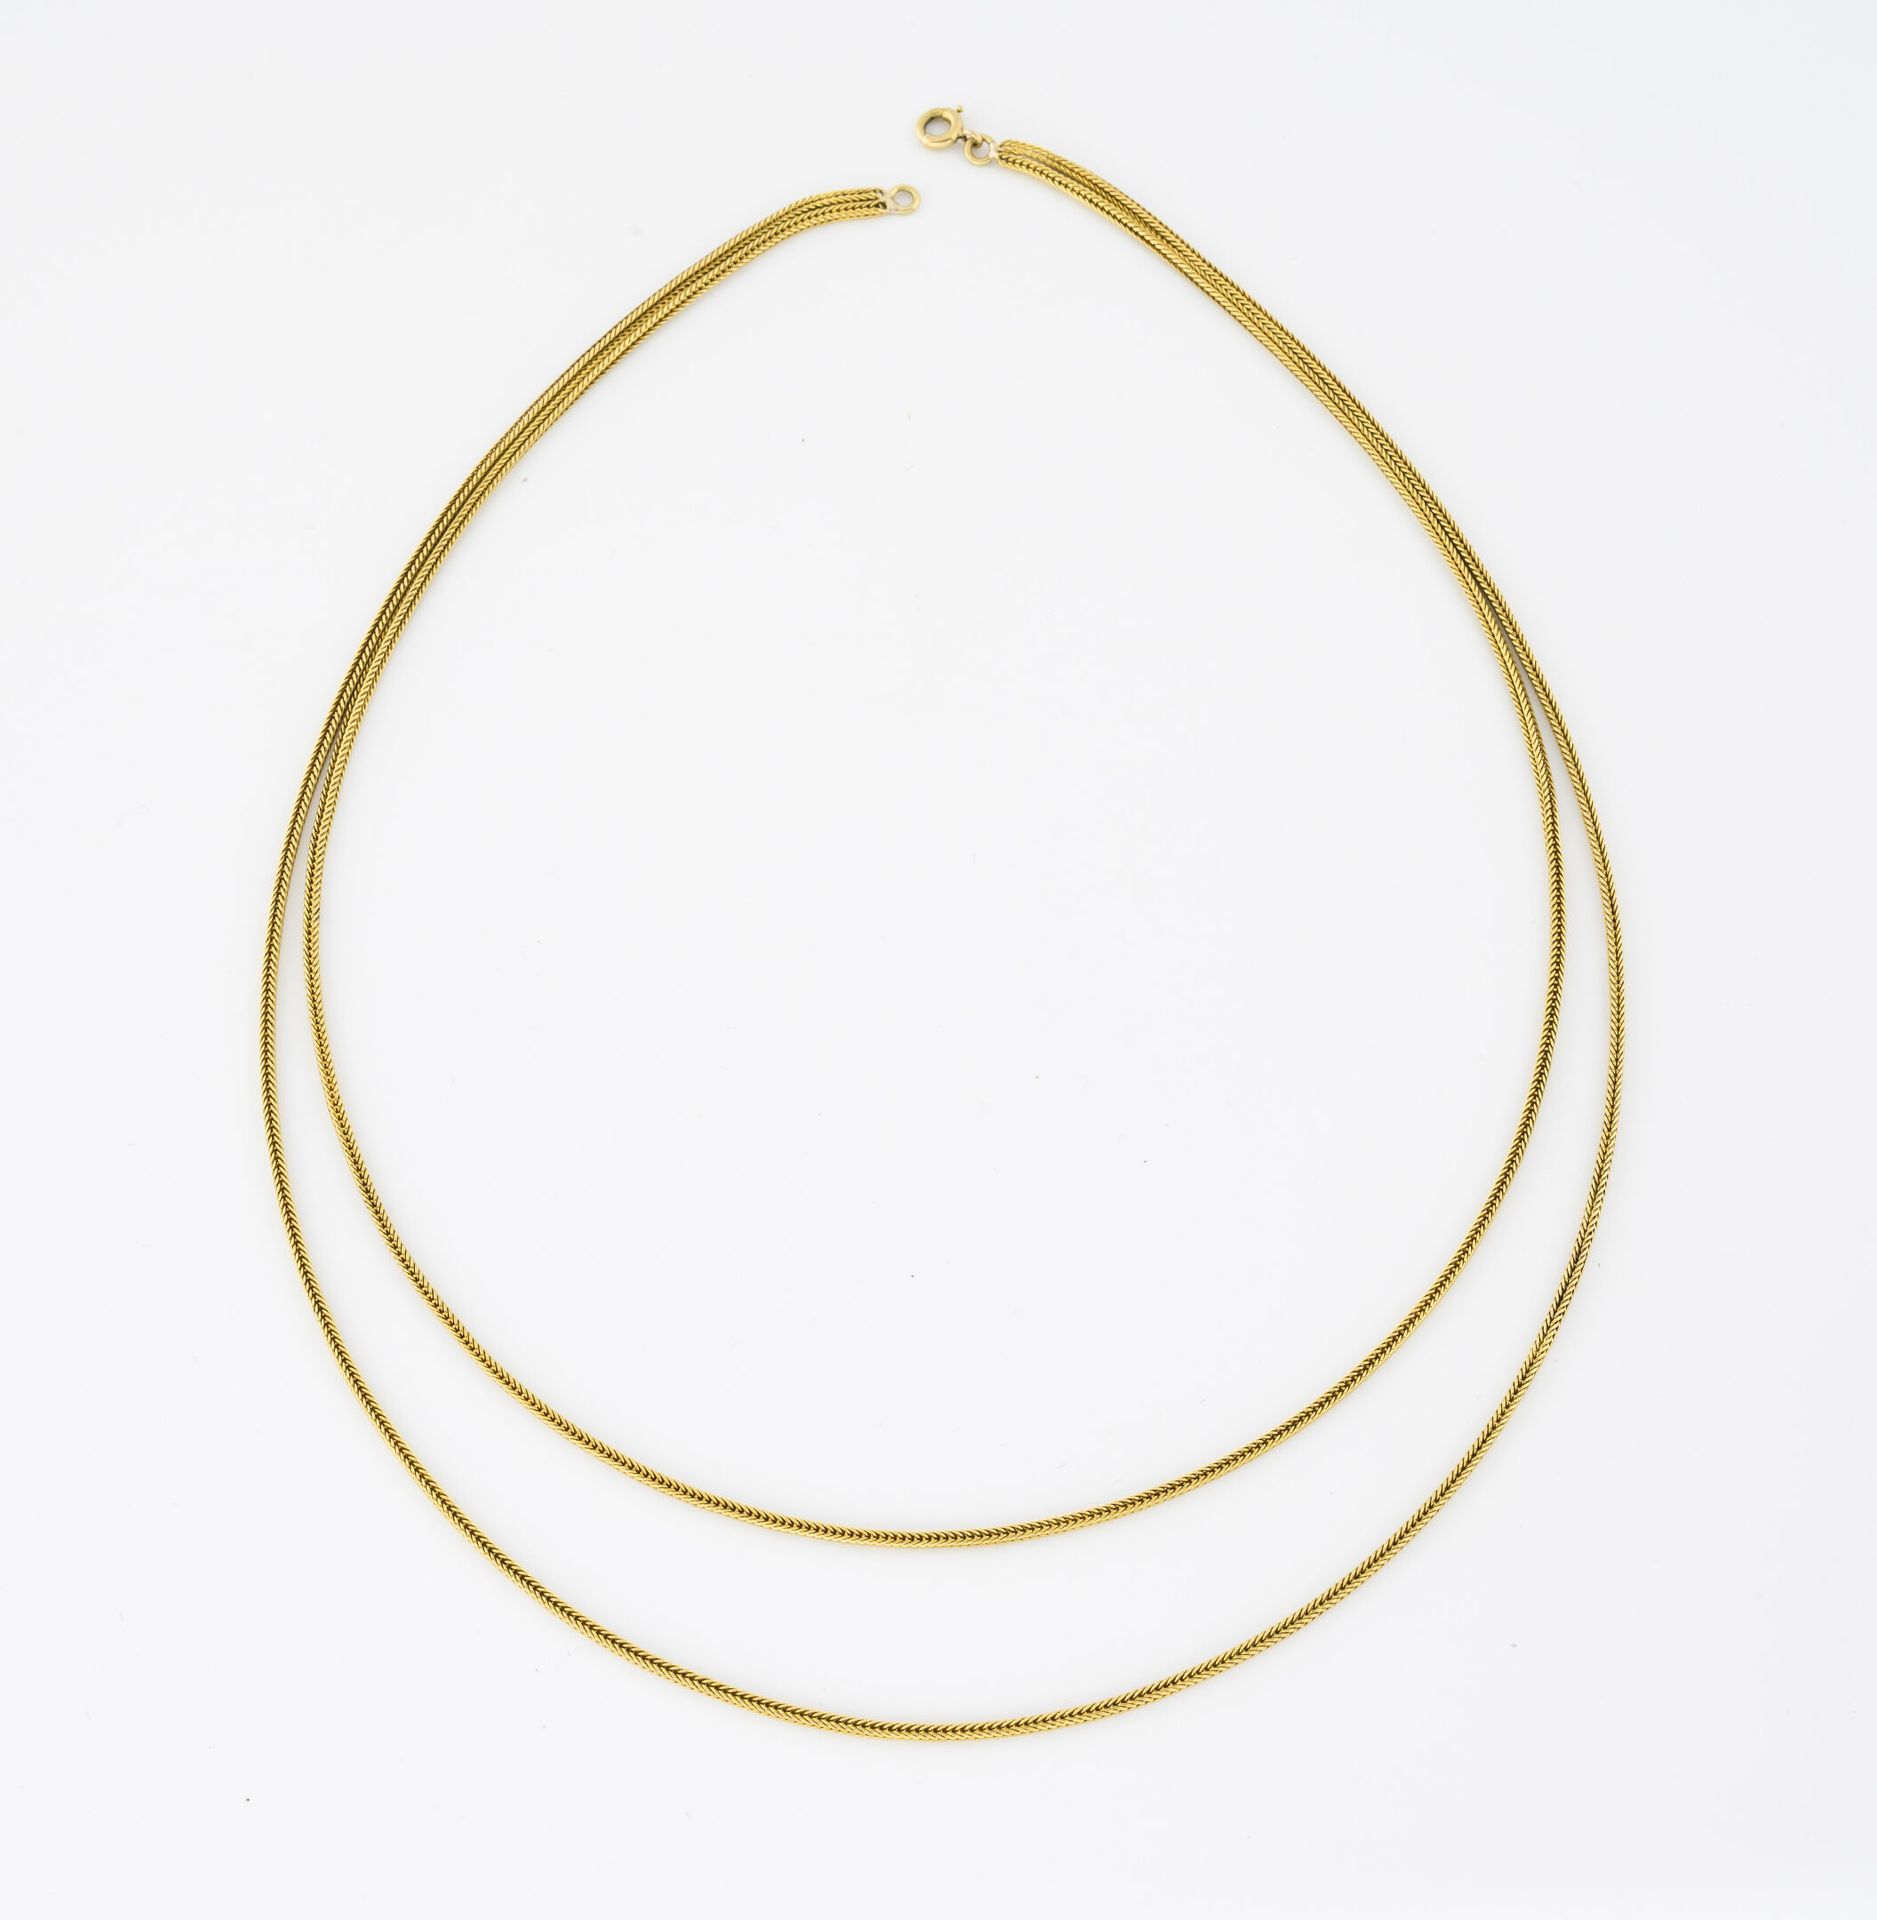 Null Yellow gold (750) necklace with two rows of braided mesh. 

Spring ring cla&hellip;